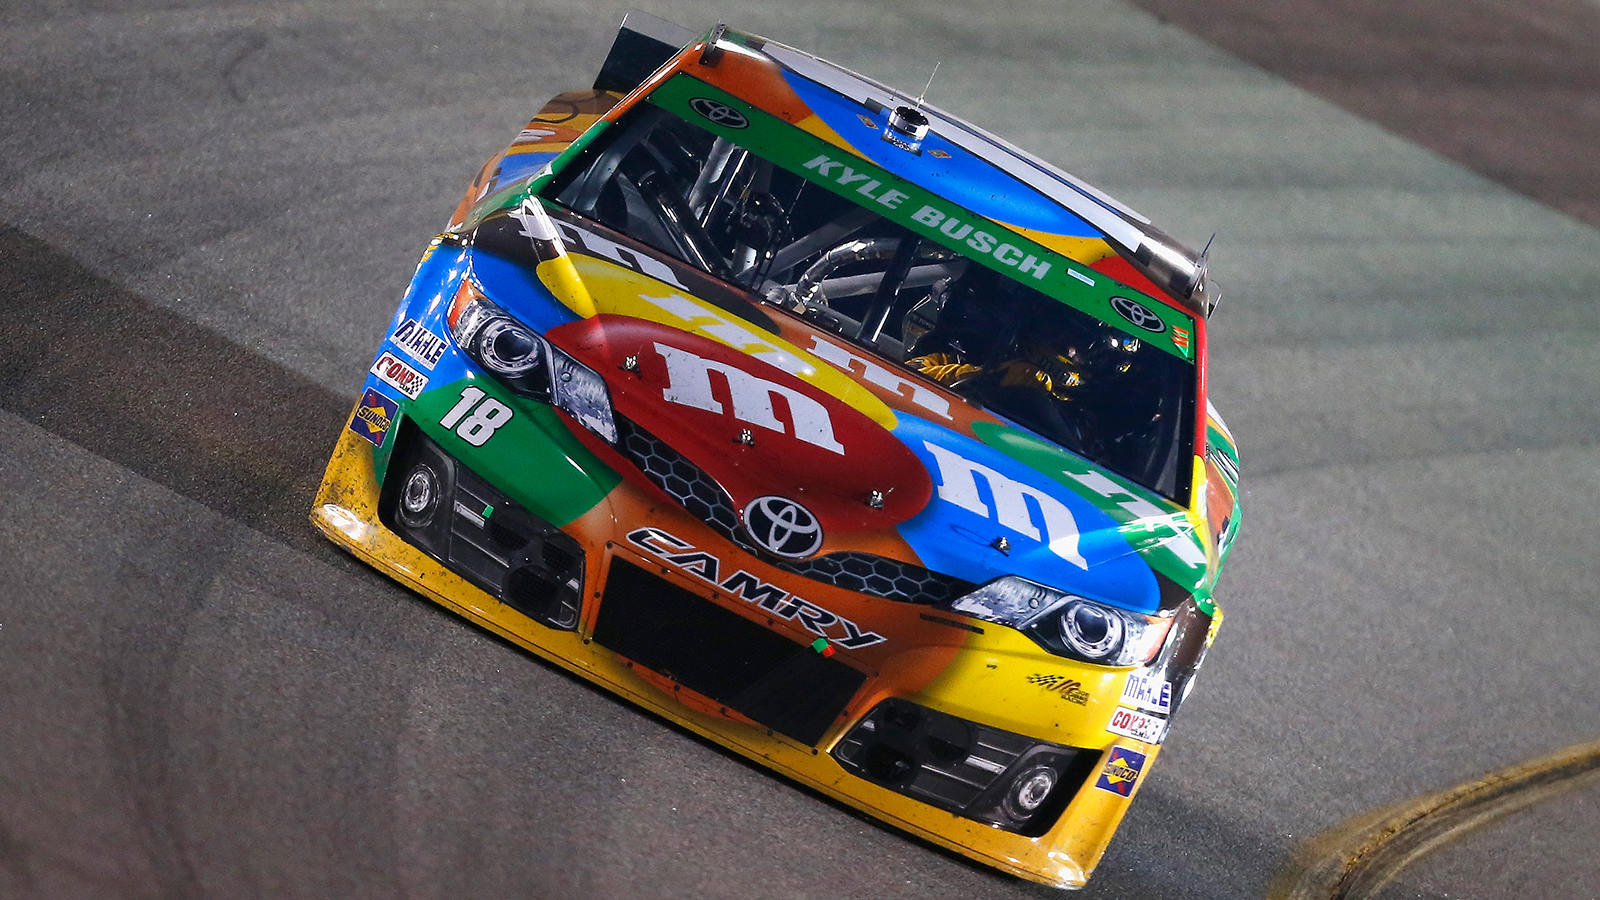 Hard-driving mofo: Just ask him, Kyle Busch will tell you